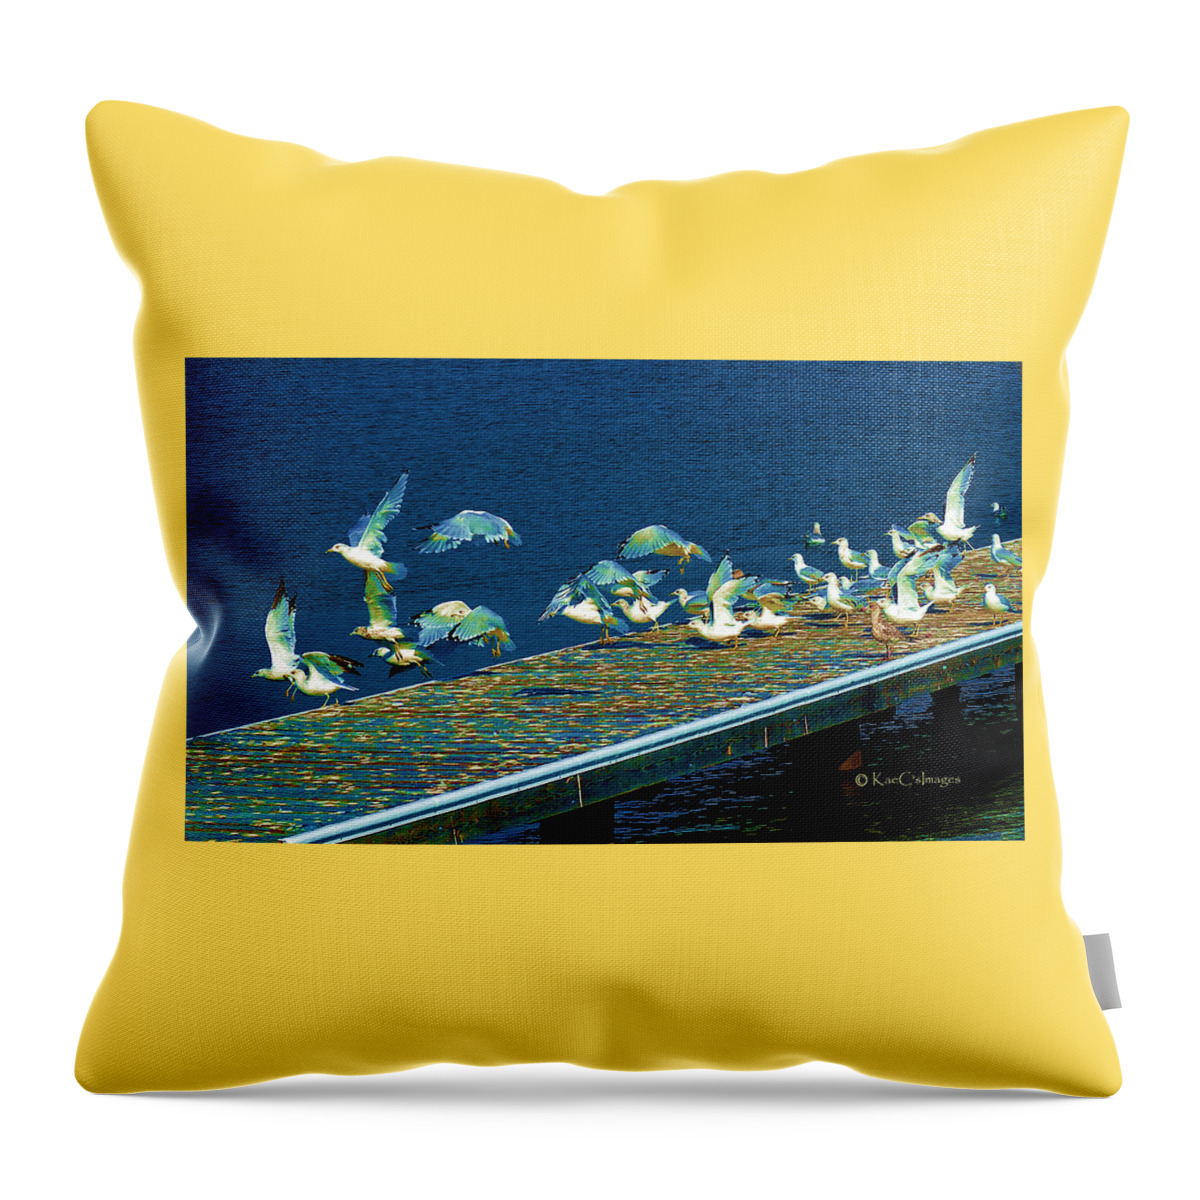 Wildlife Throw Pillow featuring the mixed media Psychedelic Gulls by Kae Cheatham